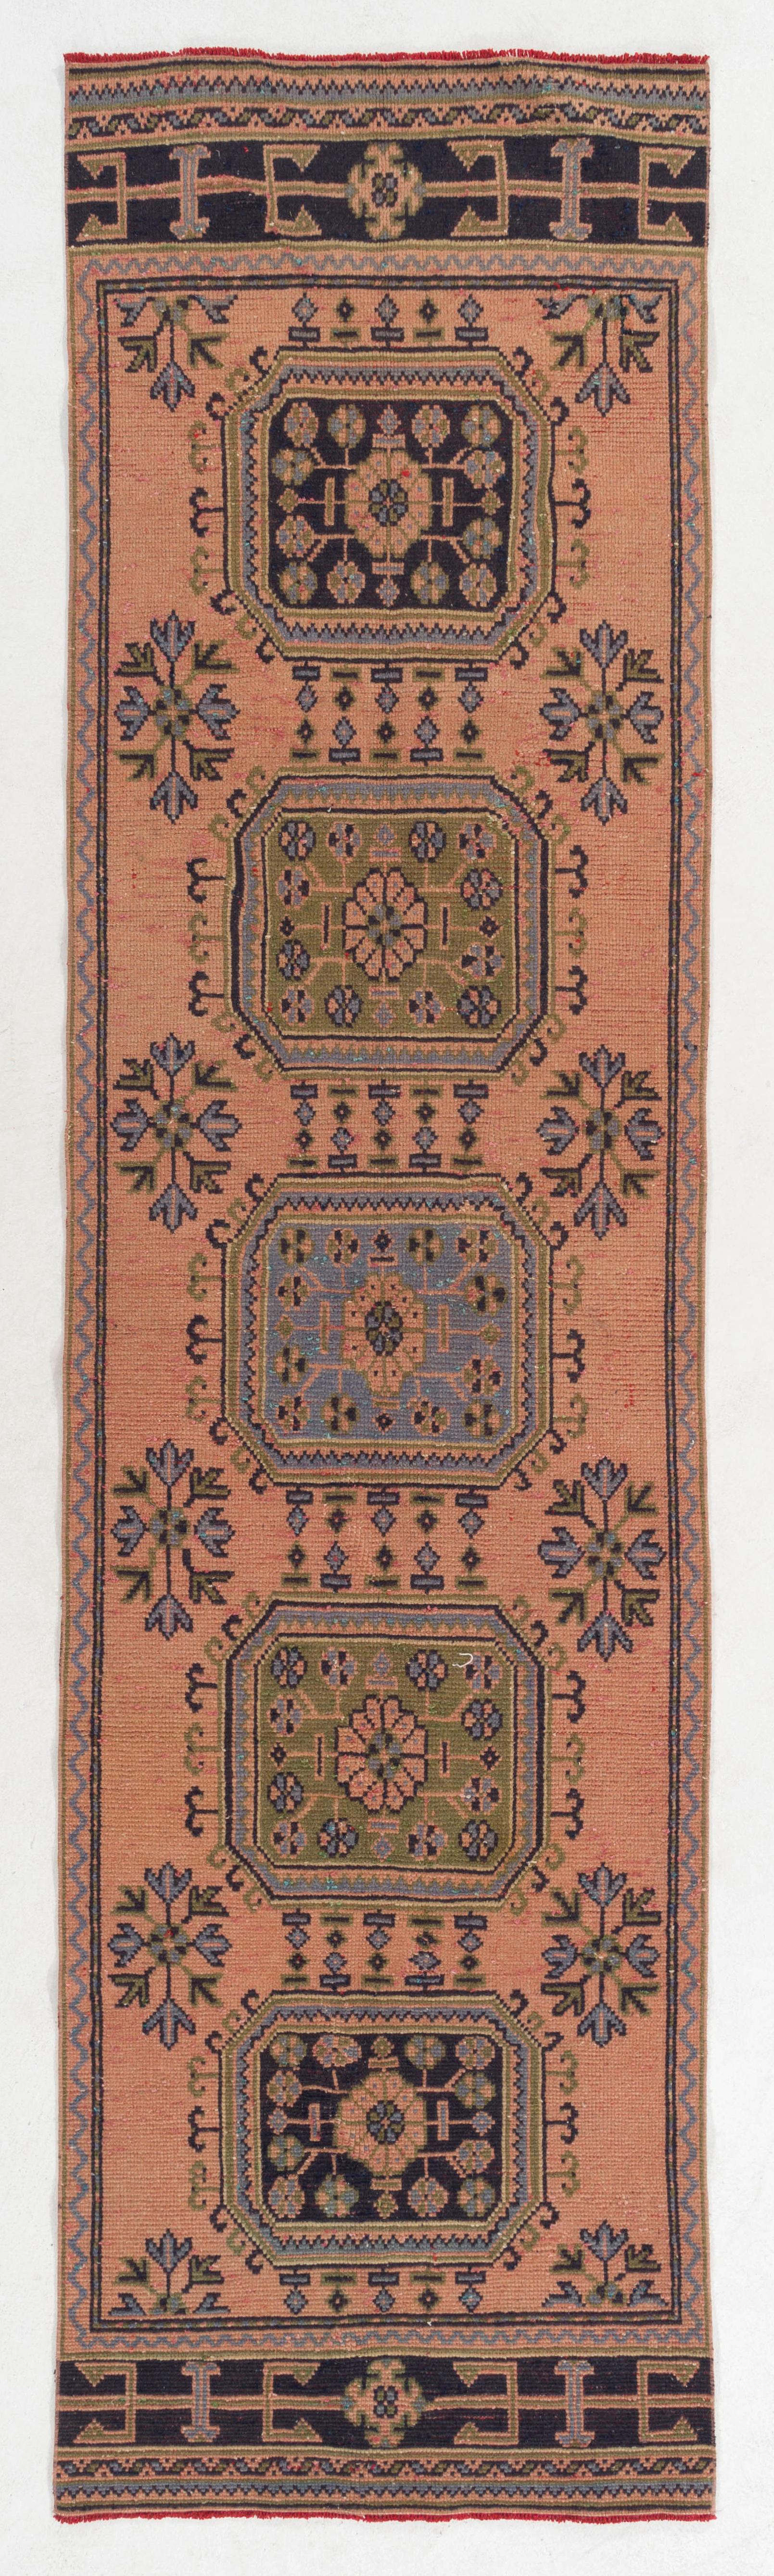 A vintage Turkish runner rug. Finely hand-knotted with even medium wool pile on wool foundation. Very good condition. Sturdy and as clean as a brand new rug (deep washed professionally). Size: 3 x 11.7 ft.
   